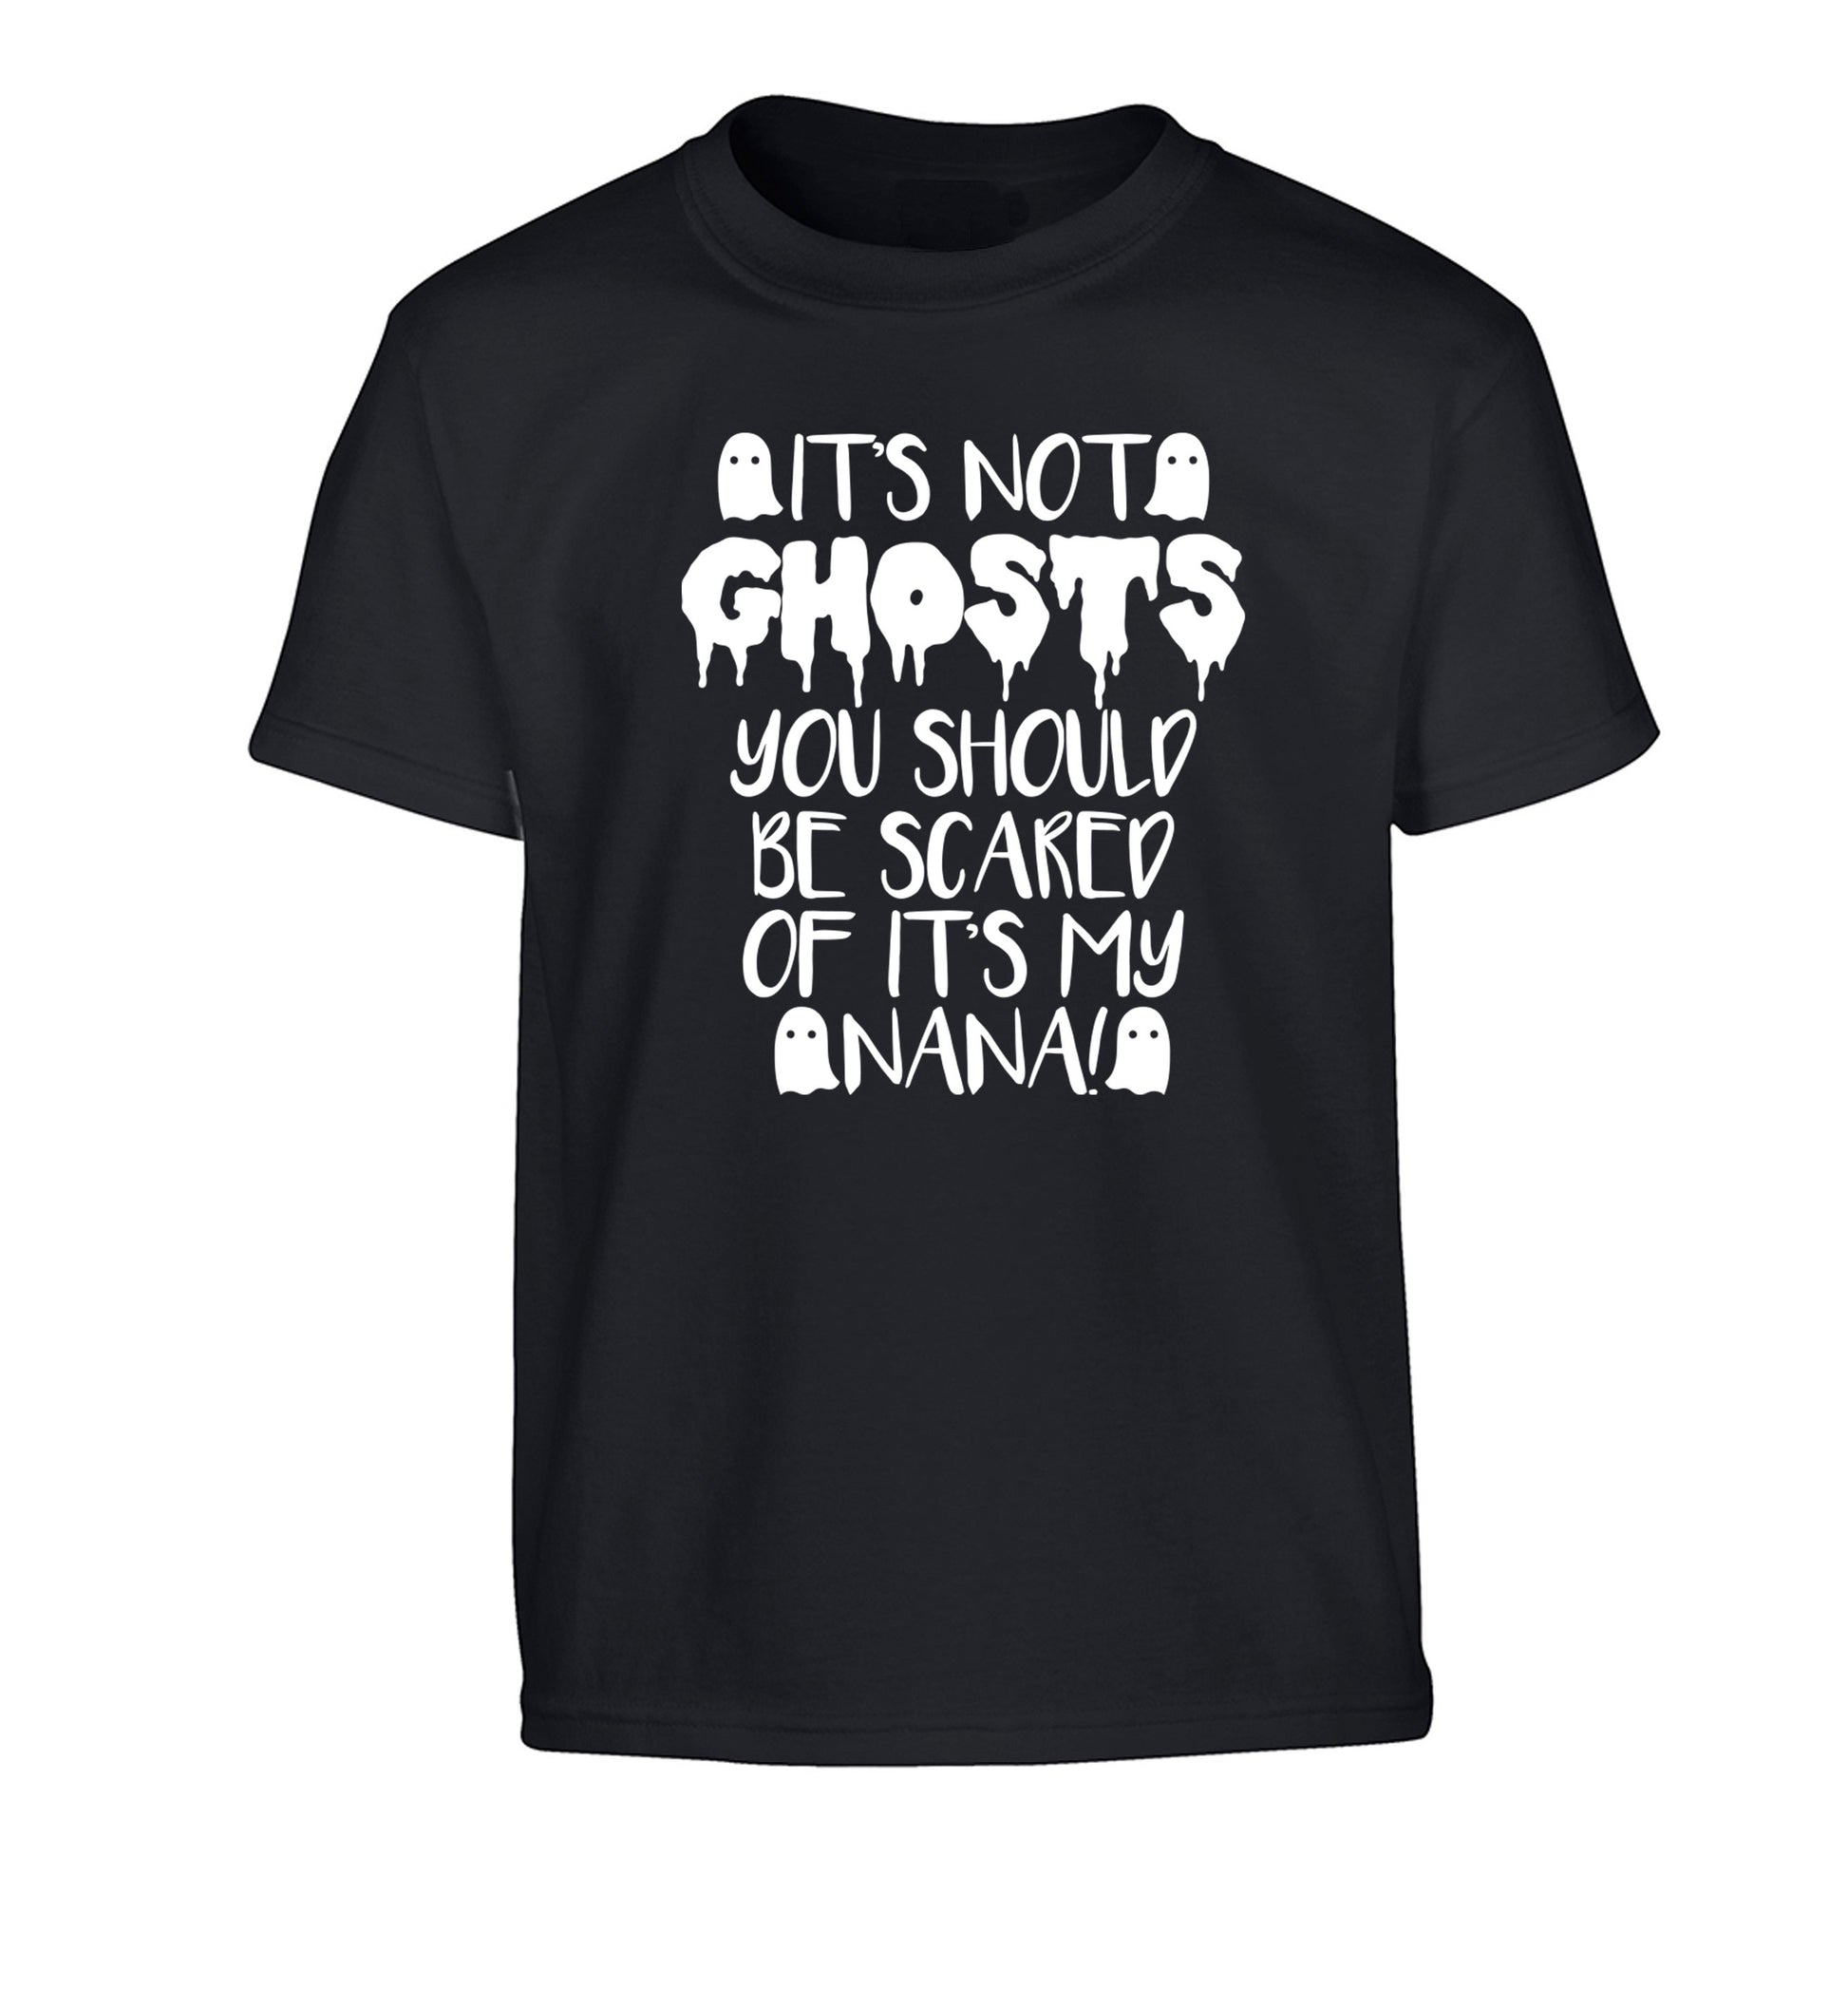 It's not ghosts you should be scared of it's my nana! Children's black Tshirt 12-14 Years